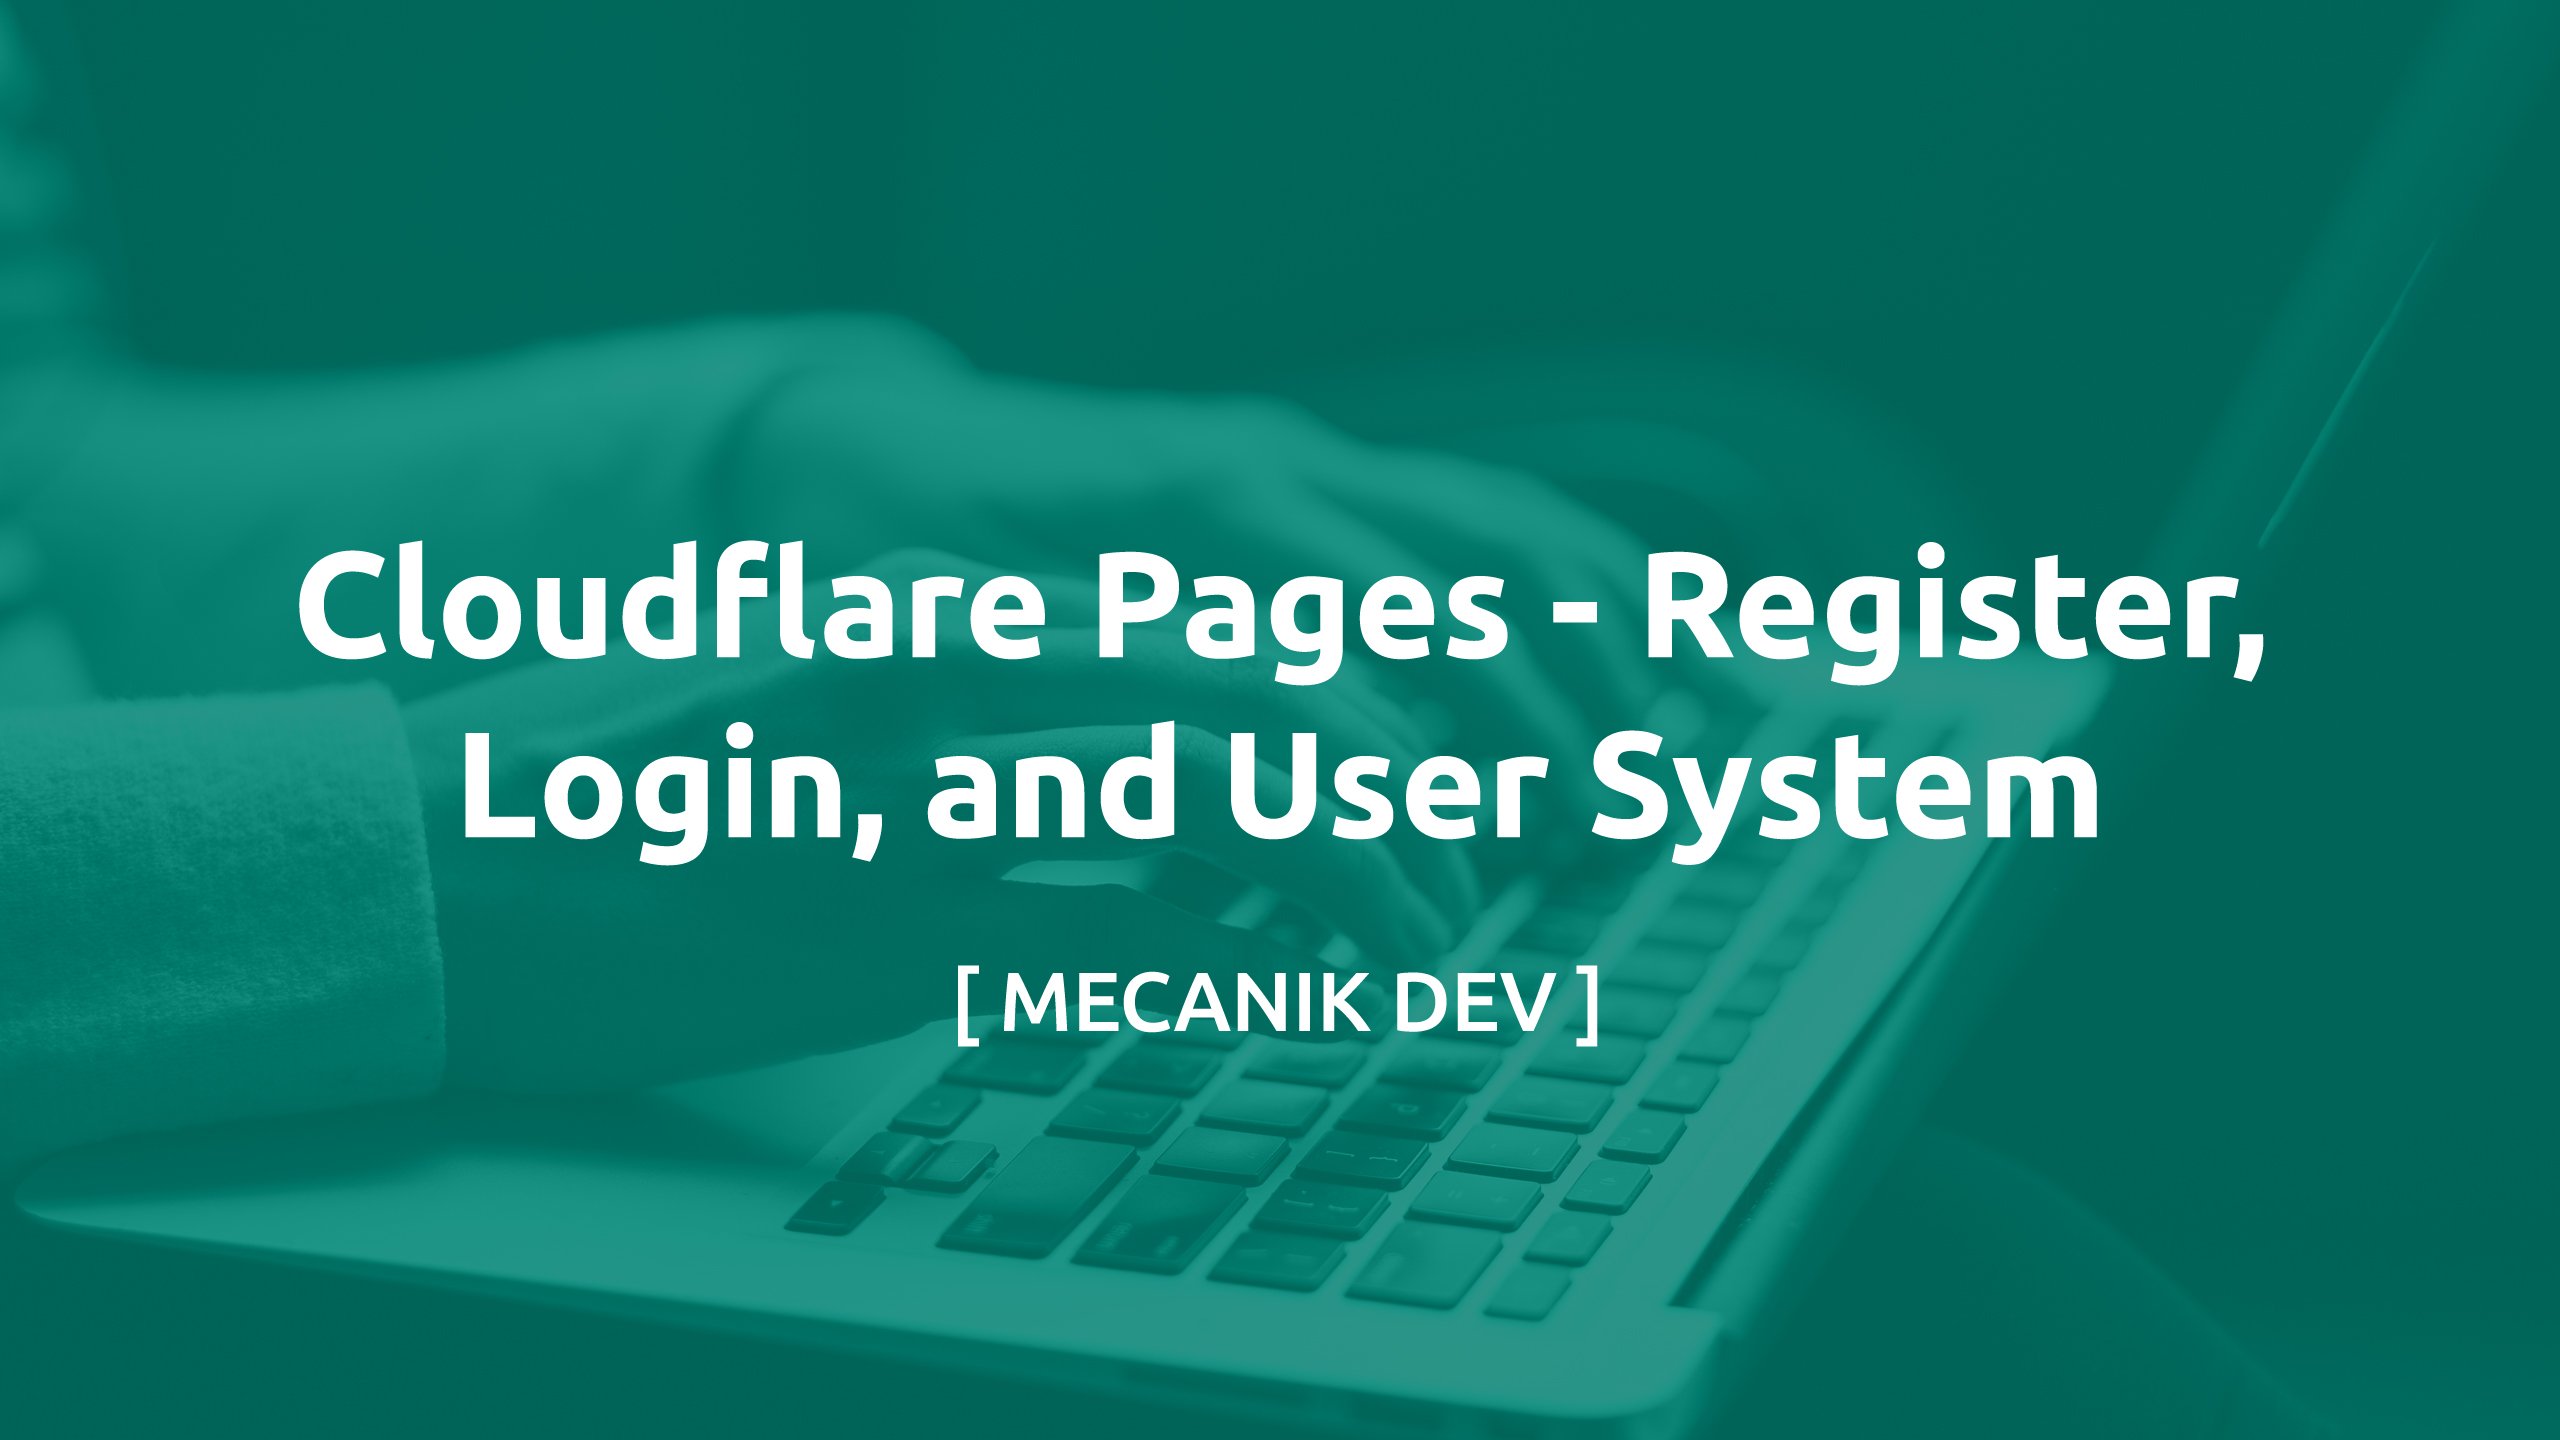 Cloudflare Pages - Register, Login, and User System